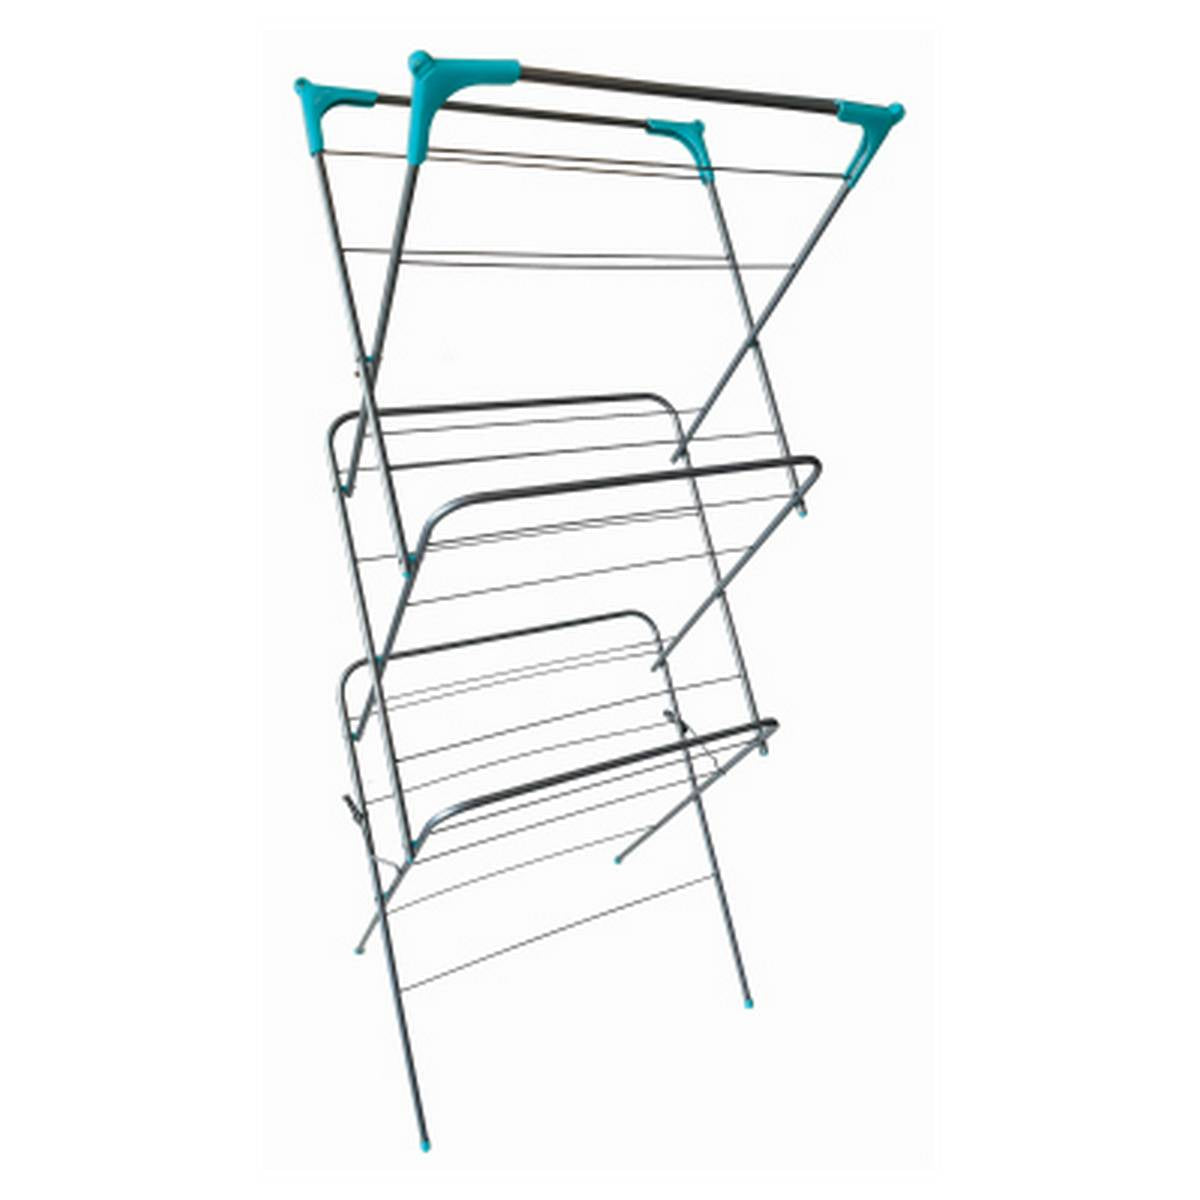 ASHLEY 3 TIER INDOOR AIRER BB-RA225